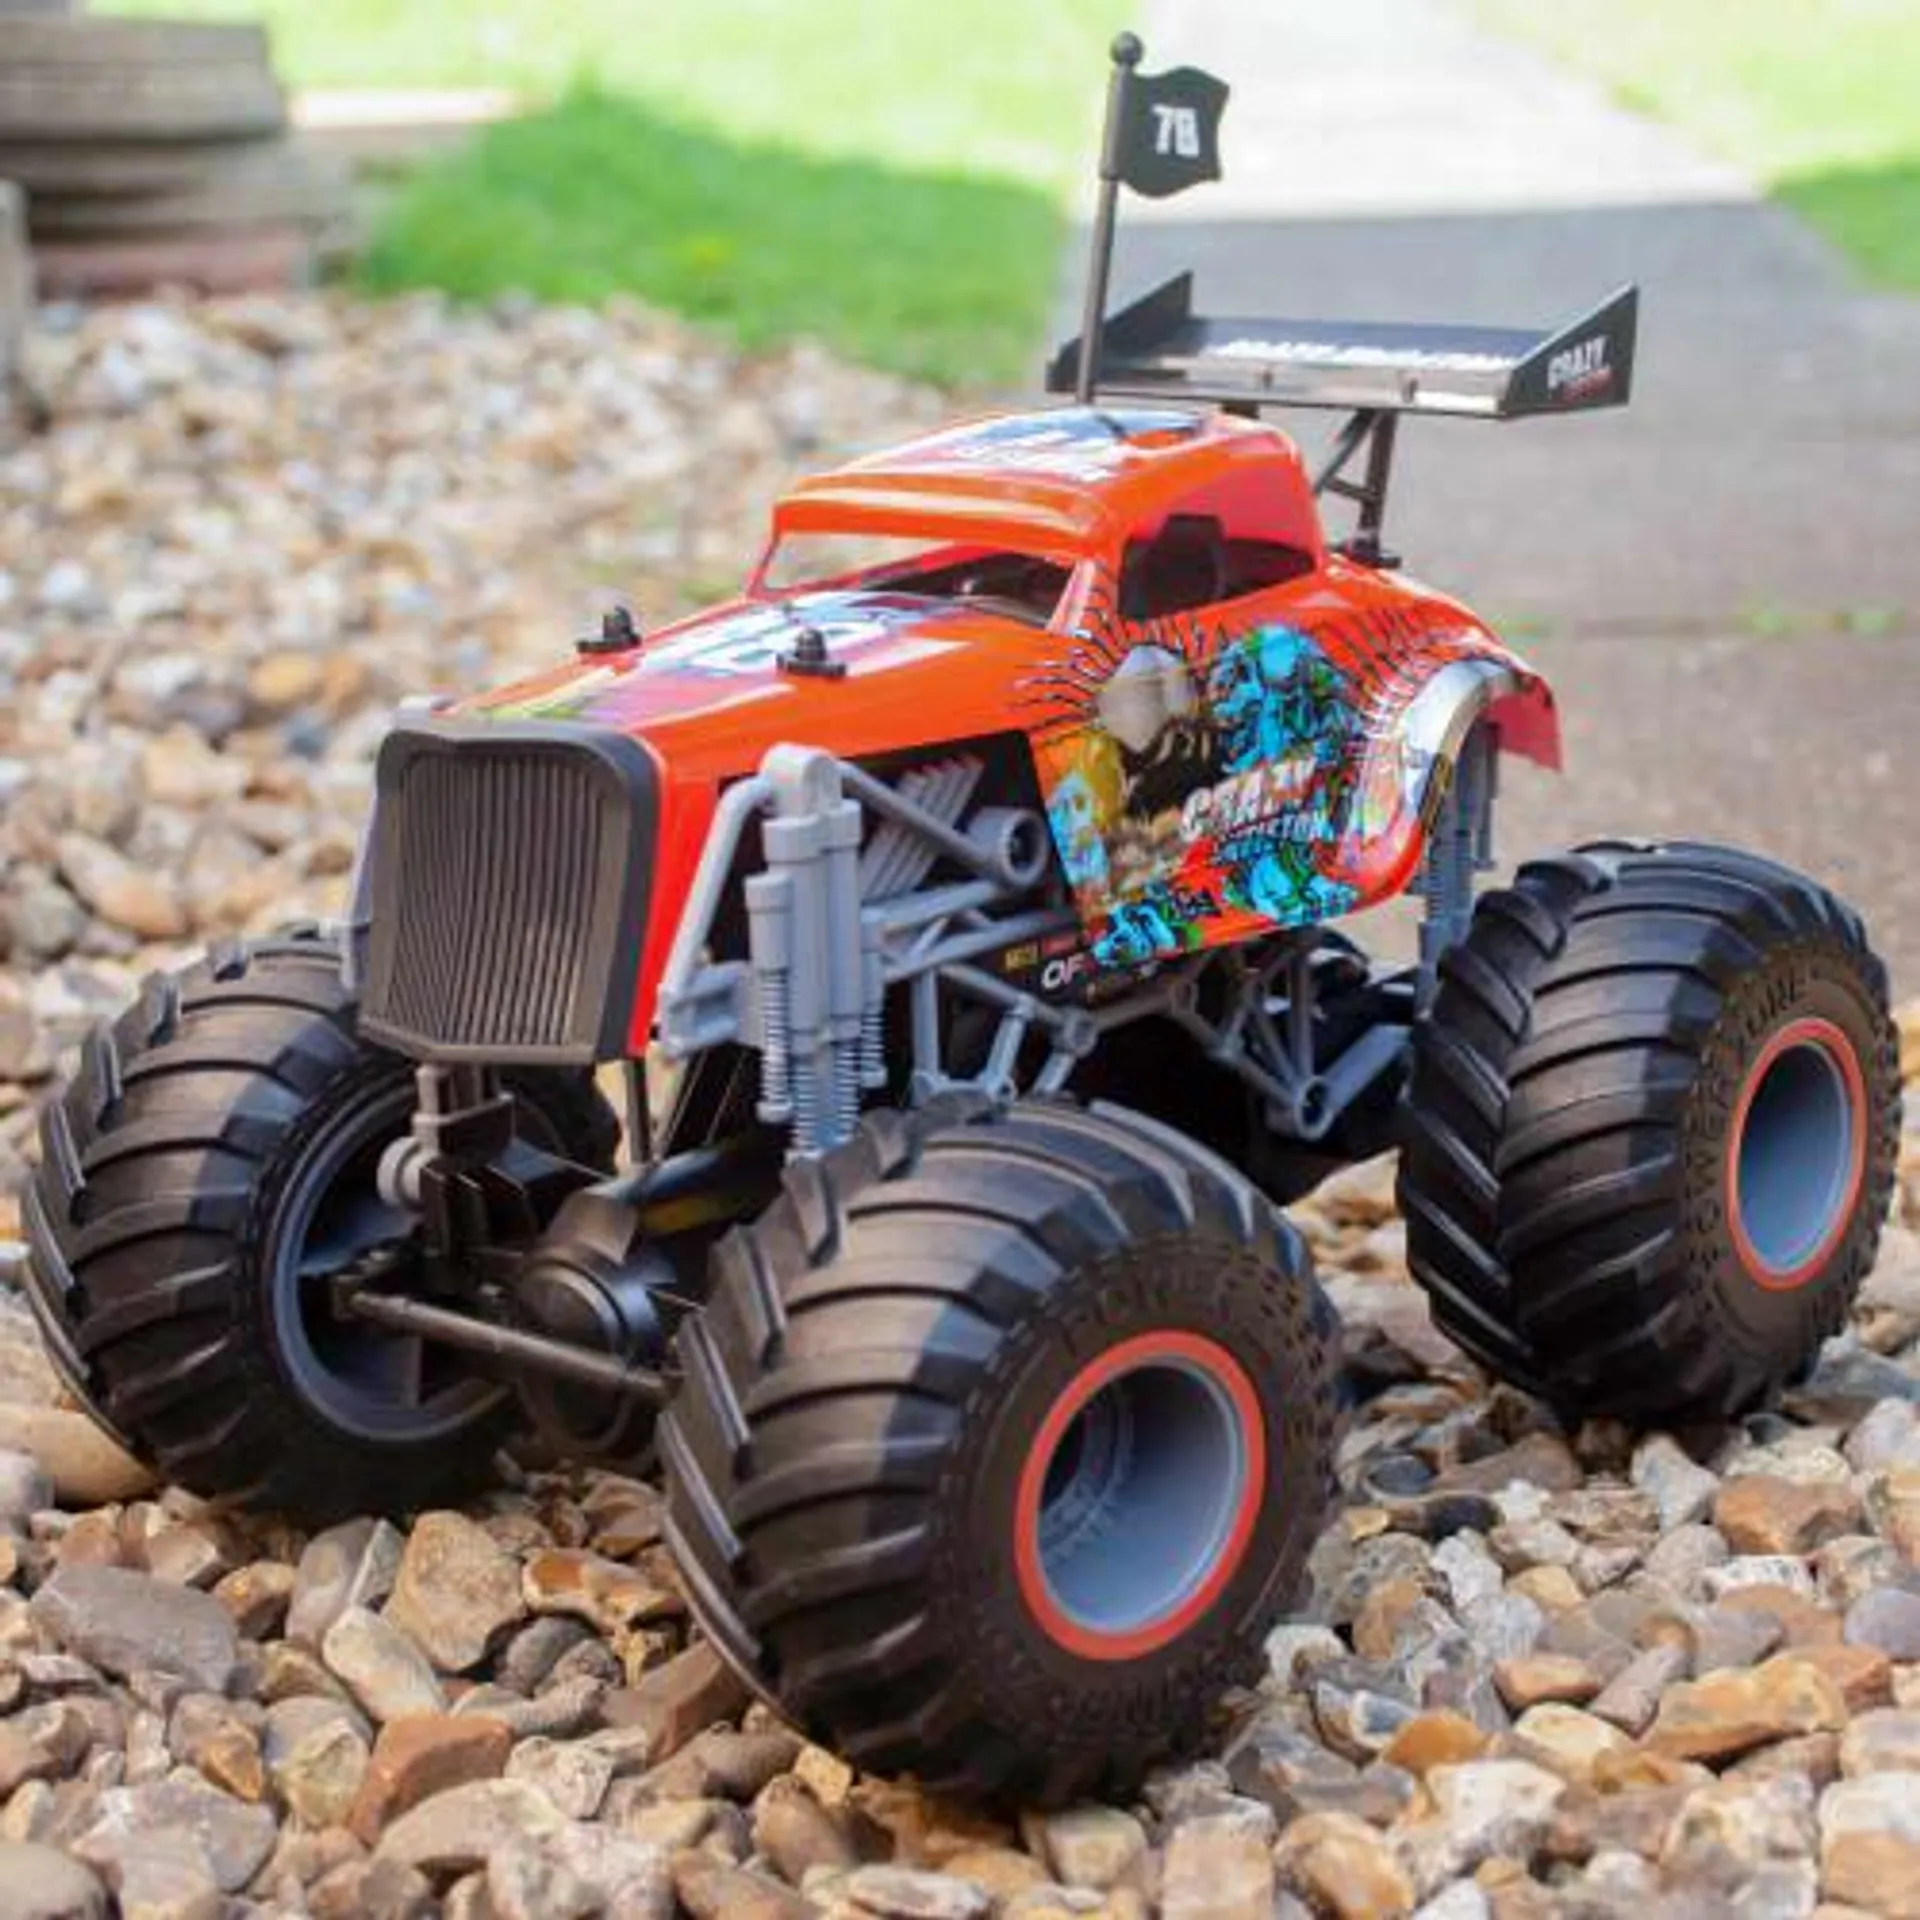 RED5 Remote Control Monster Truck 1:16 Scale